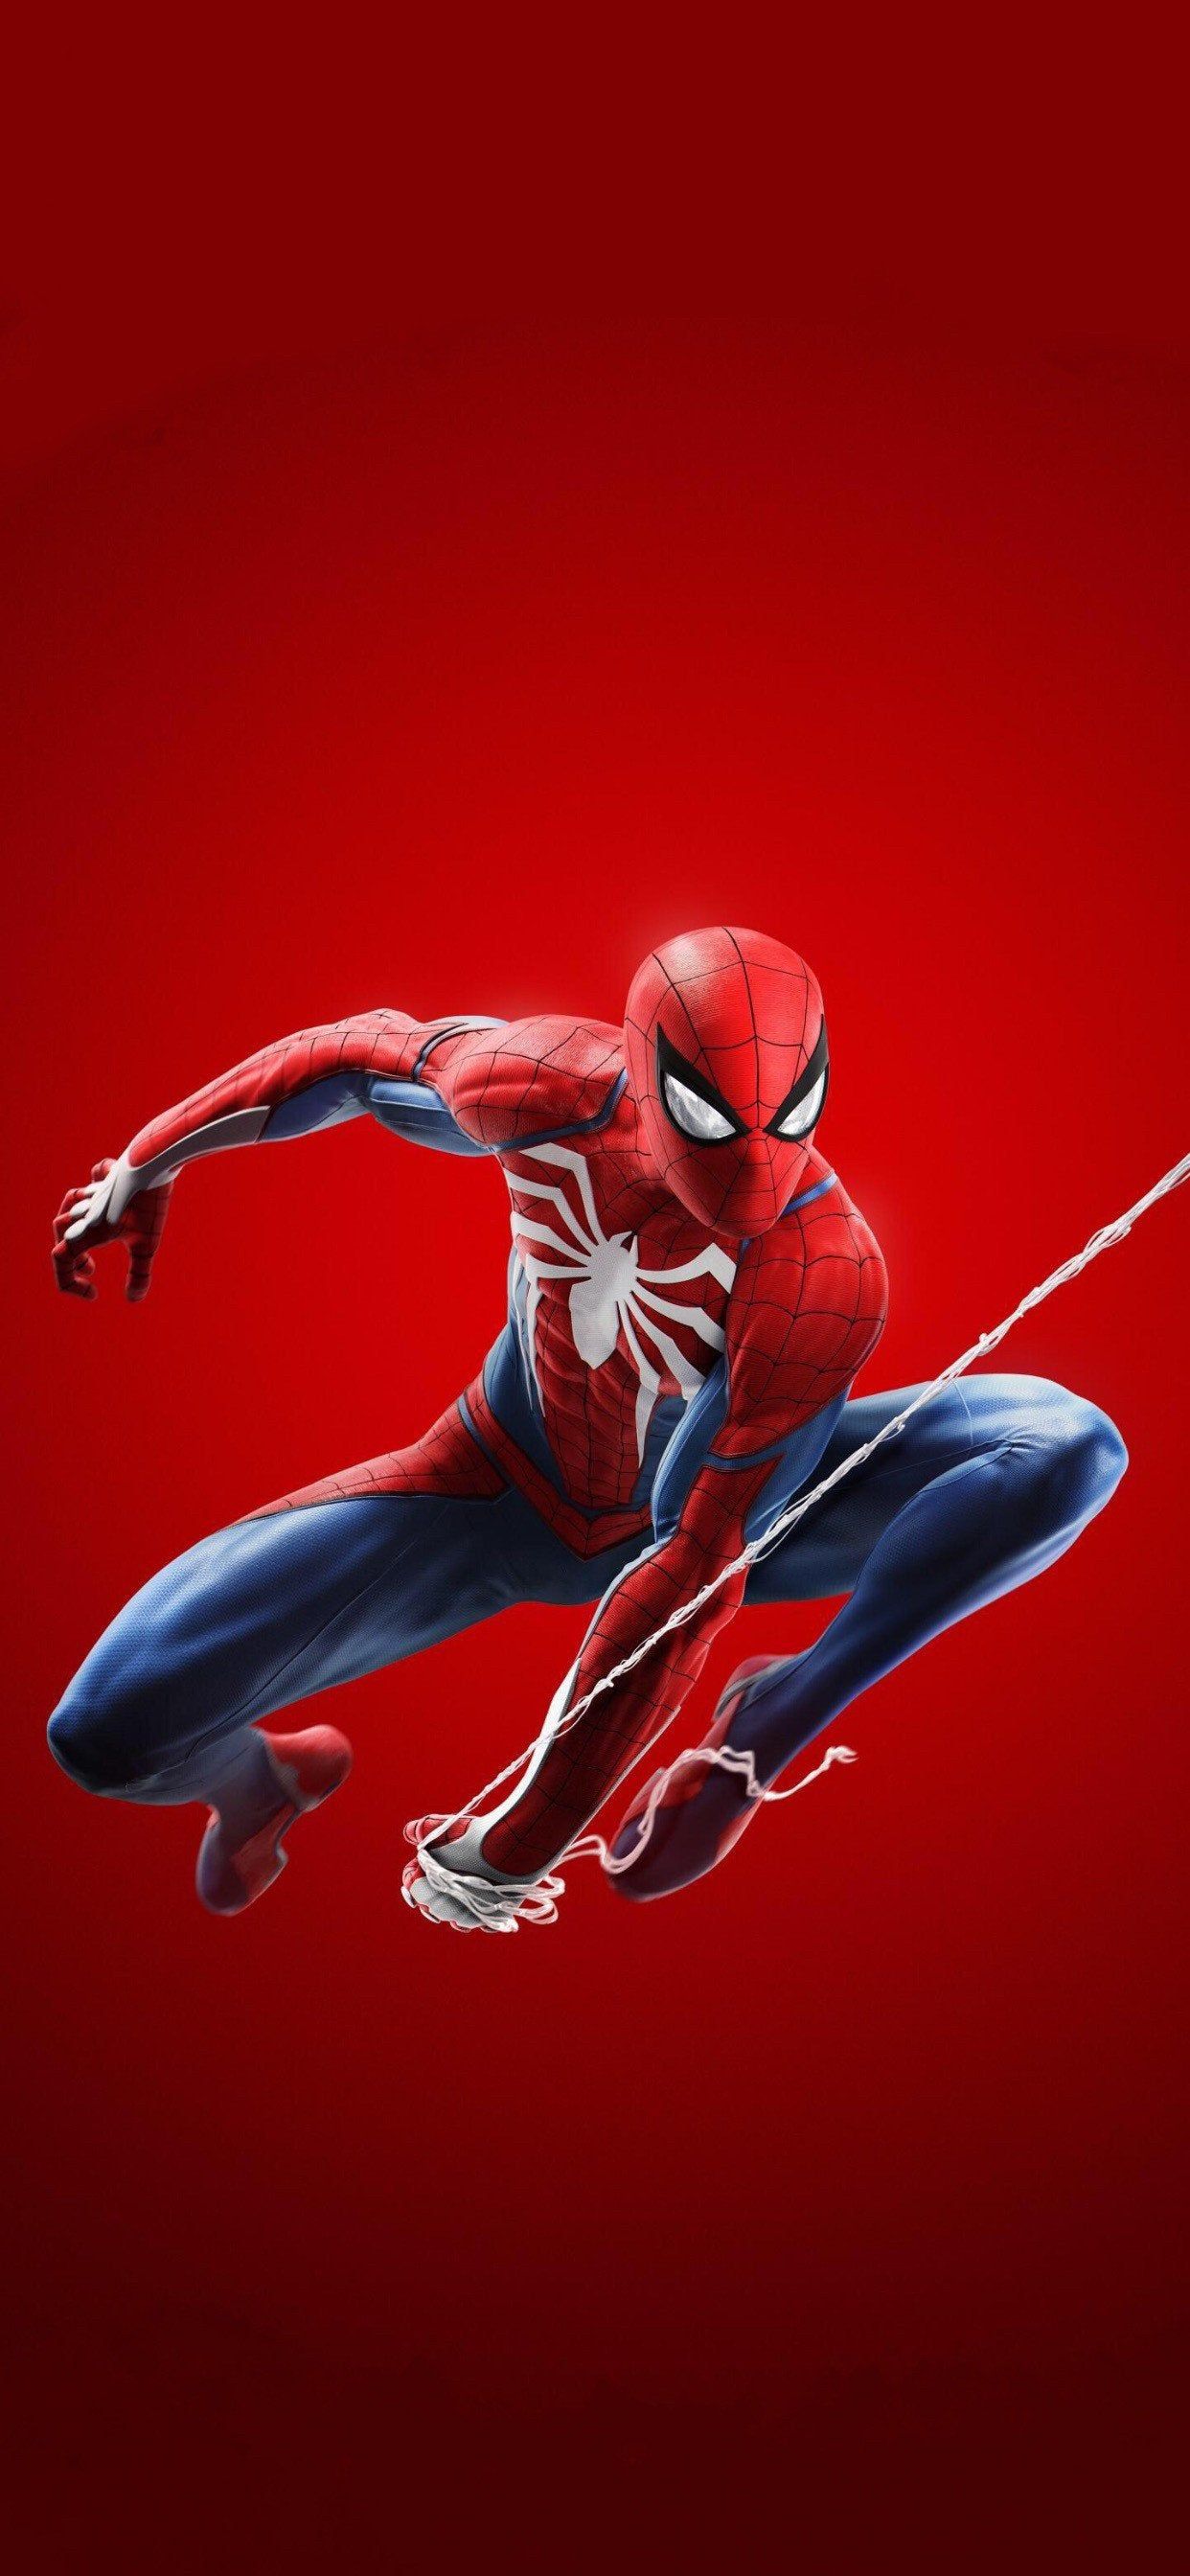 Spider Man PS4 Wallpaper I Added To For Xs Max. IPhone X